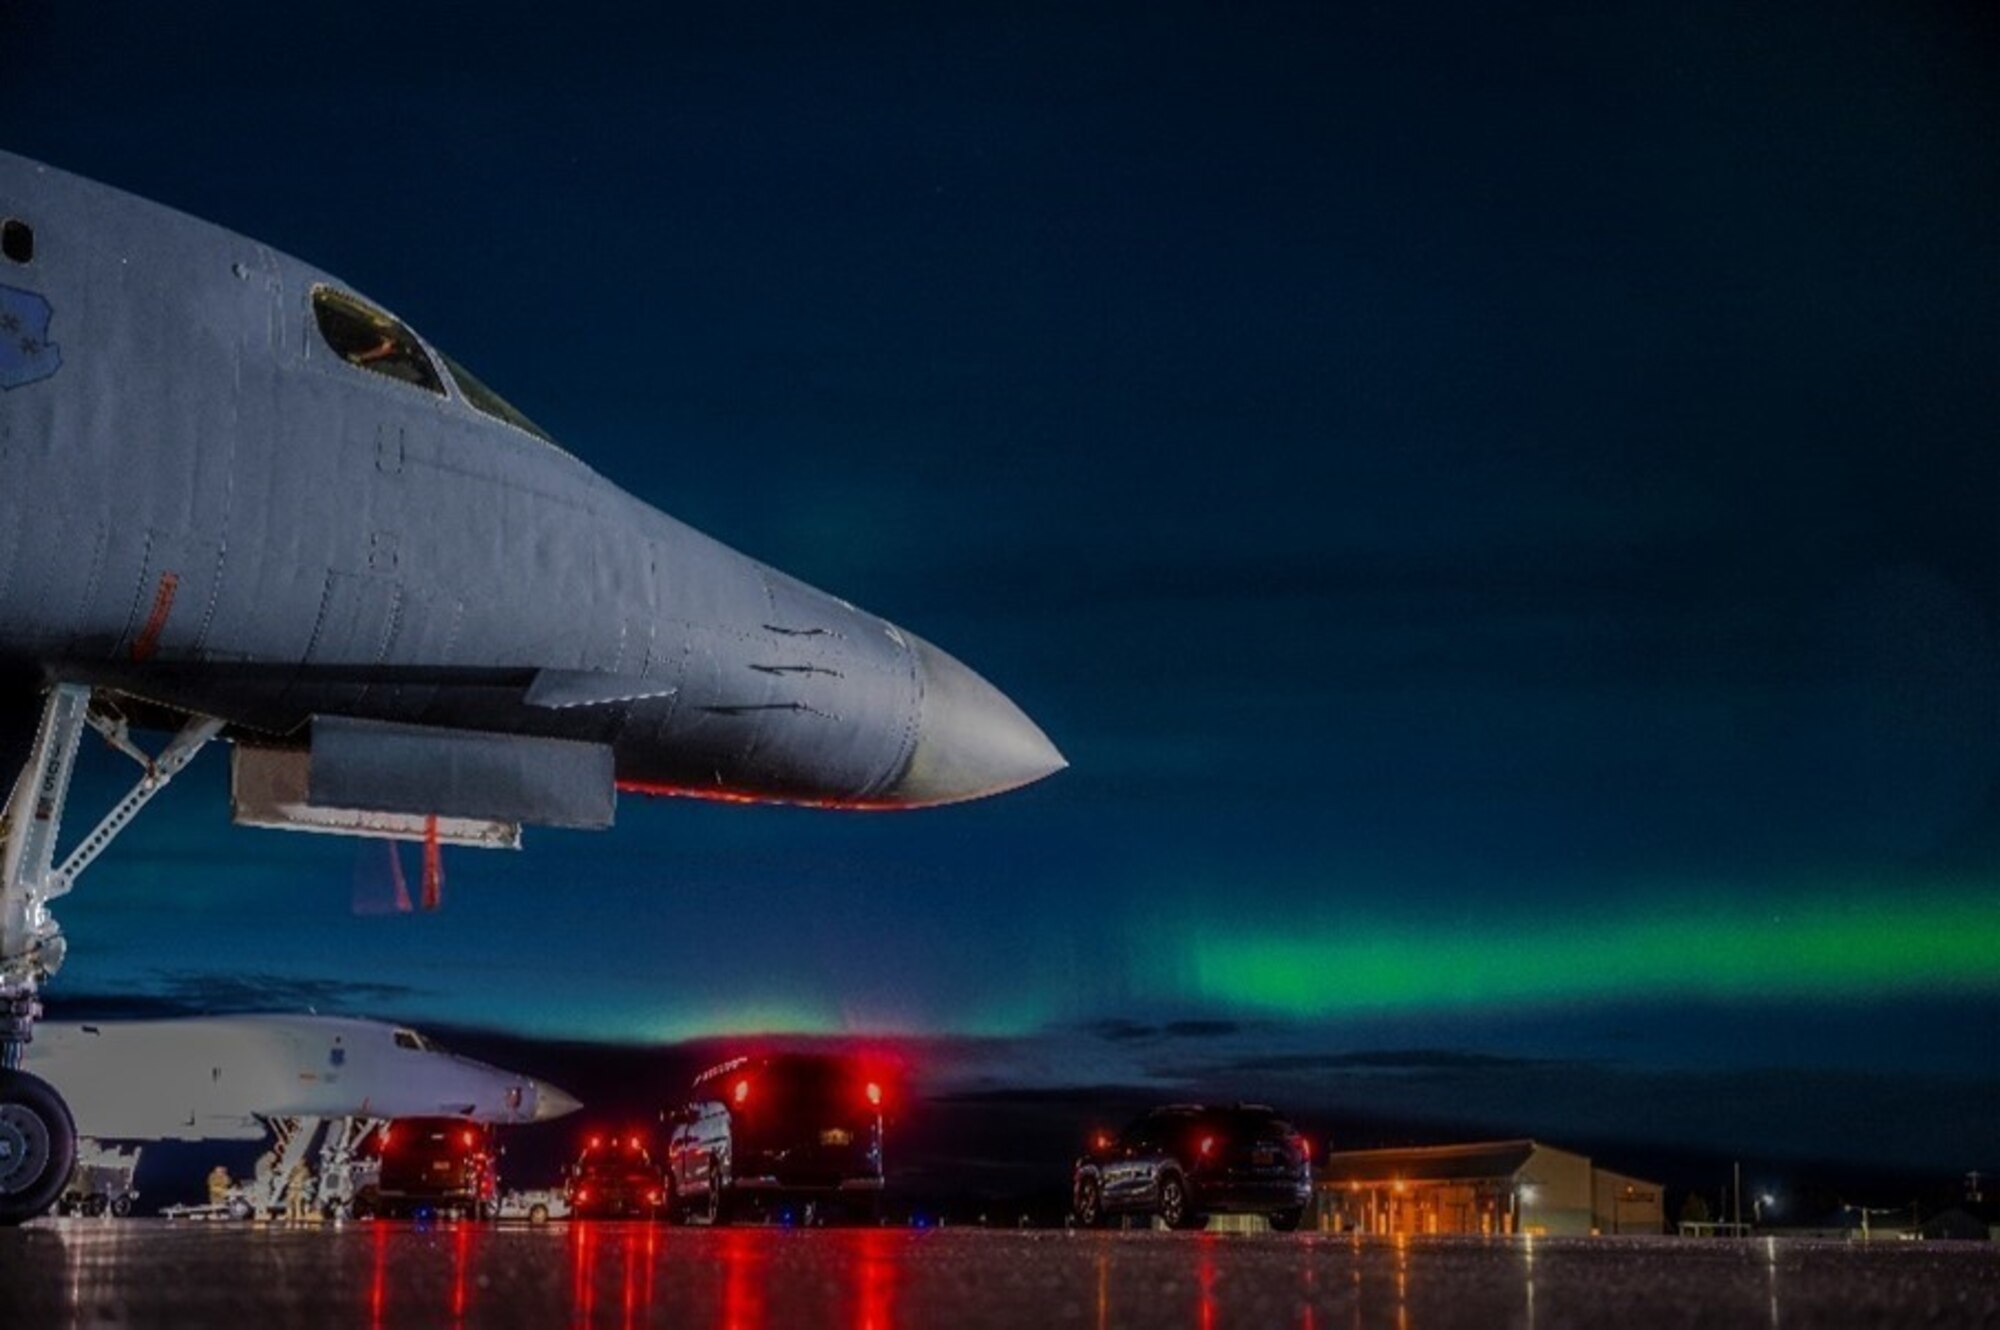 A B-1B Lancer assigned to the 7th Bomb Wing at Dyess Air Force Base, Texas, sits on the flightline at Eielson AFB, Alaska, during the Baked Alaskan exercise, Sept. 9, 2022. During the Baked Alaskan exercise, Dyess Airmen and reserve mission partners deployed two B-1s from home station to Eielson AFB. While there, they tested fly away communication kits, conducted routine maintenance and armament reloading, and integrated with a variety of joint force aircraft. (U.S. Air Force photo by Senior Airman Colin Hollowell)